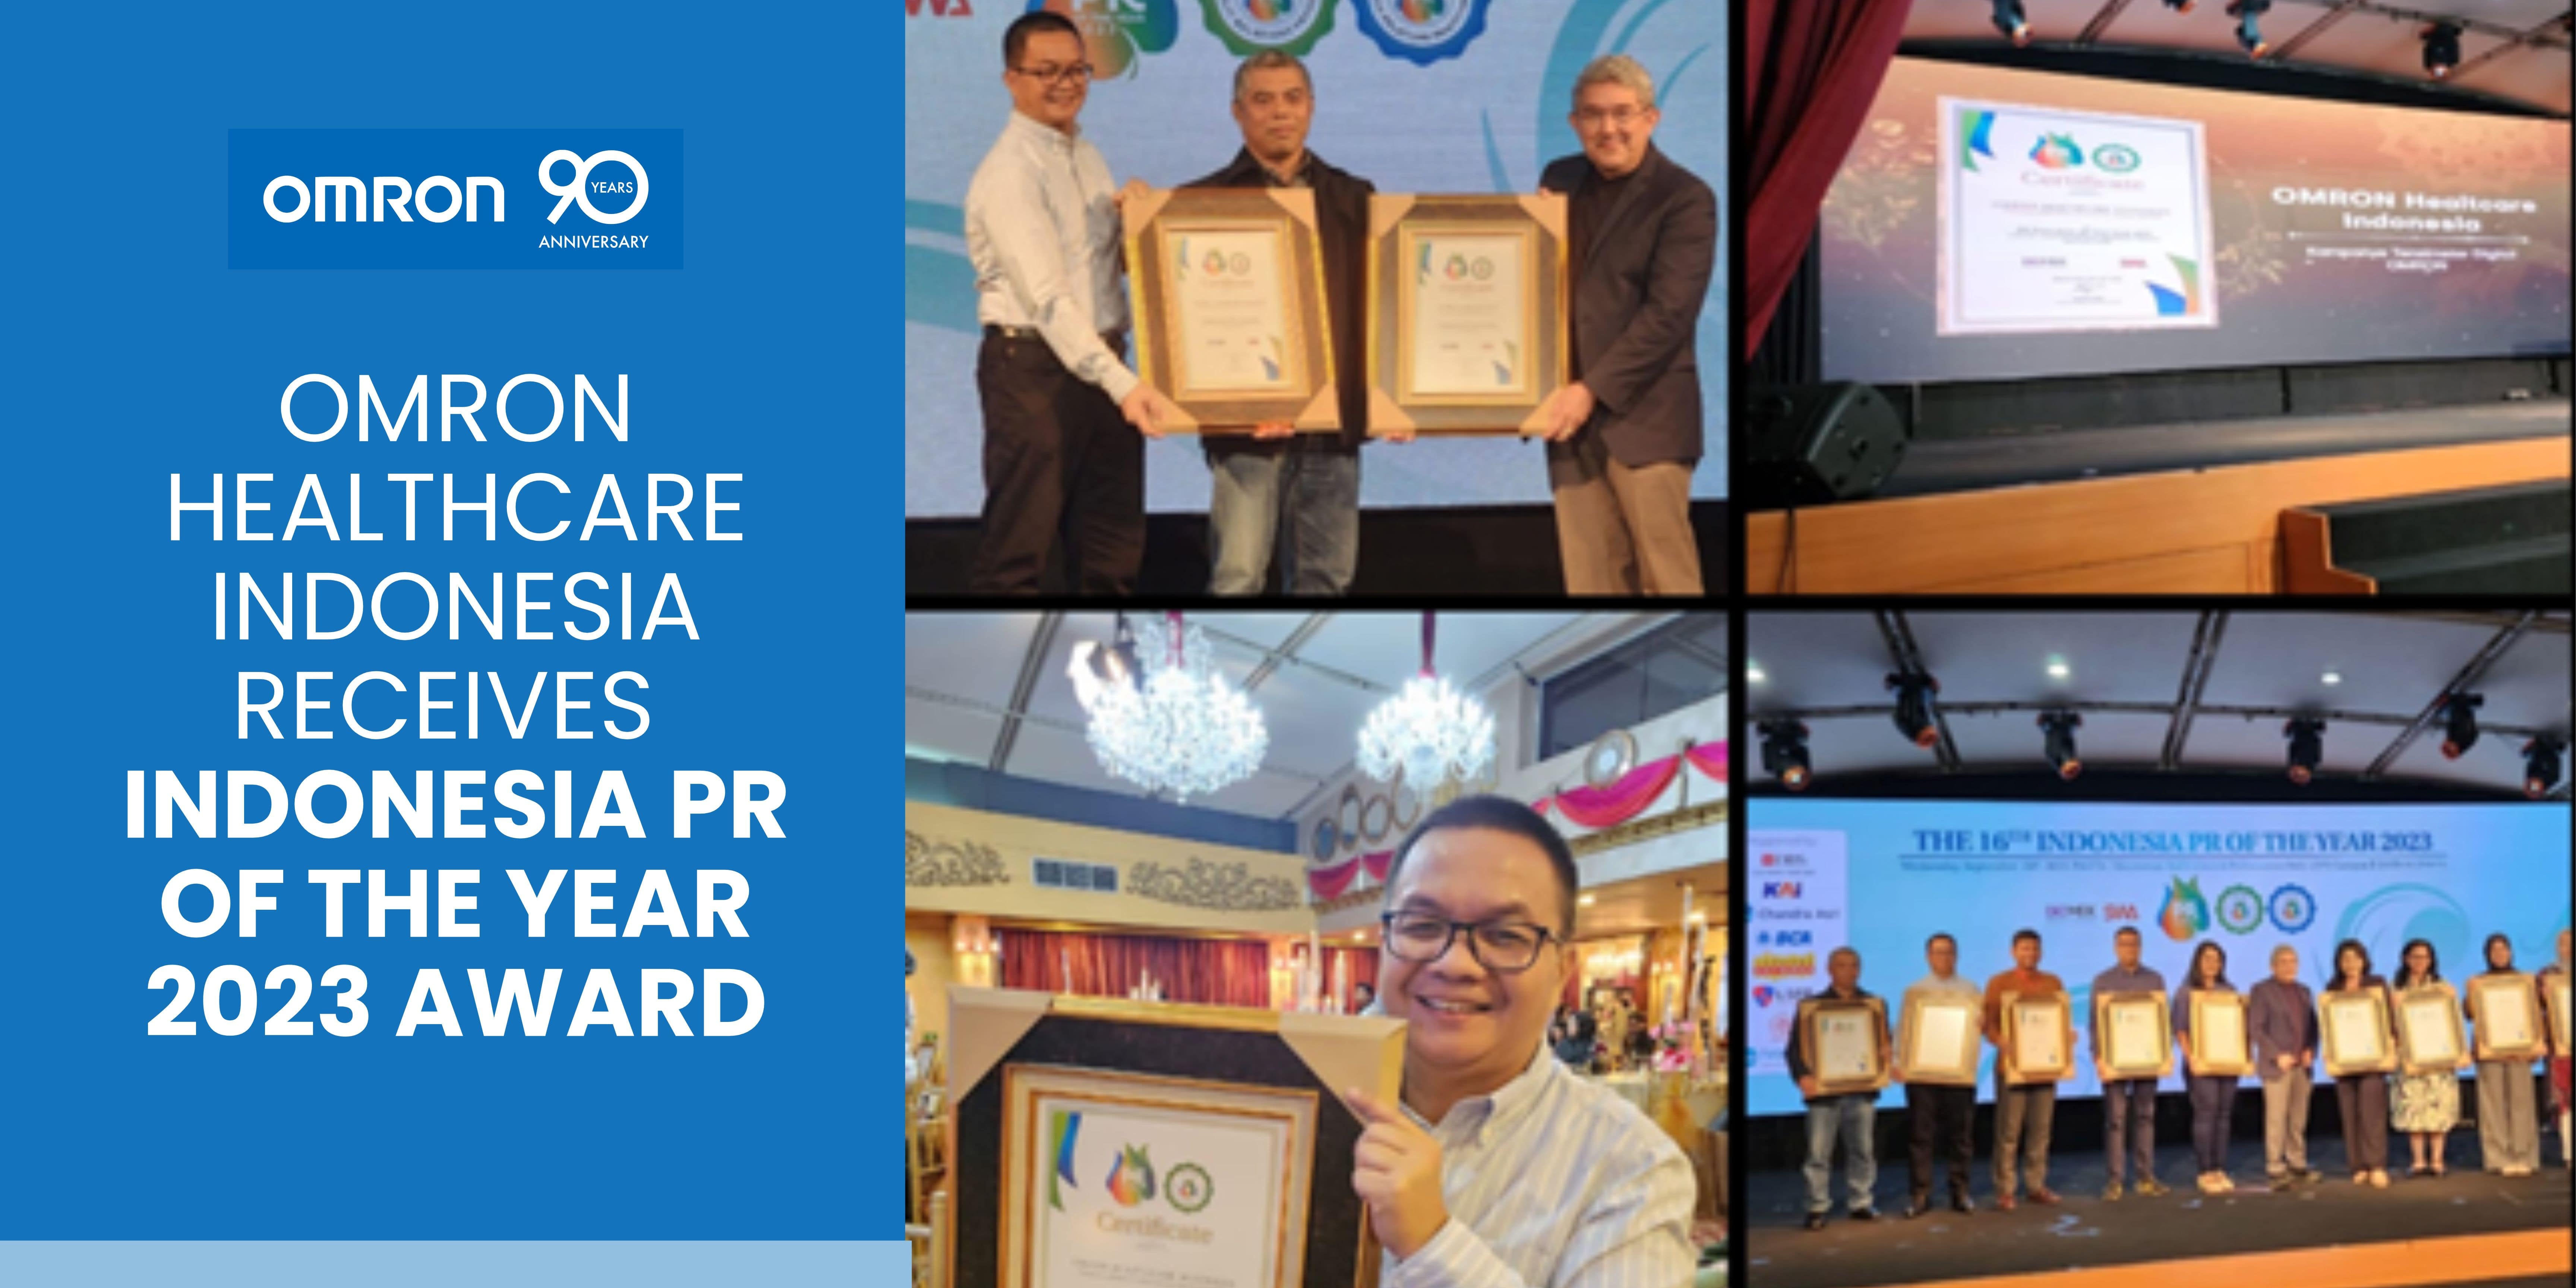 OMRON Healthcare Indonesia receives Indonesia PR of The Year 2023 Award